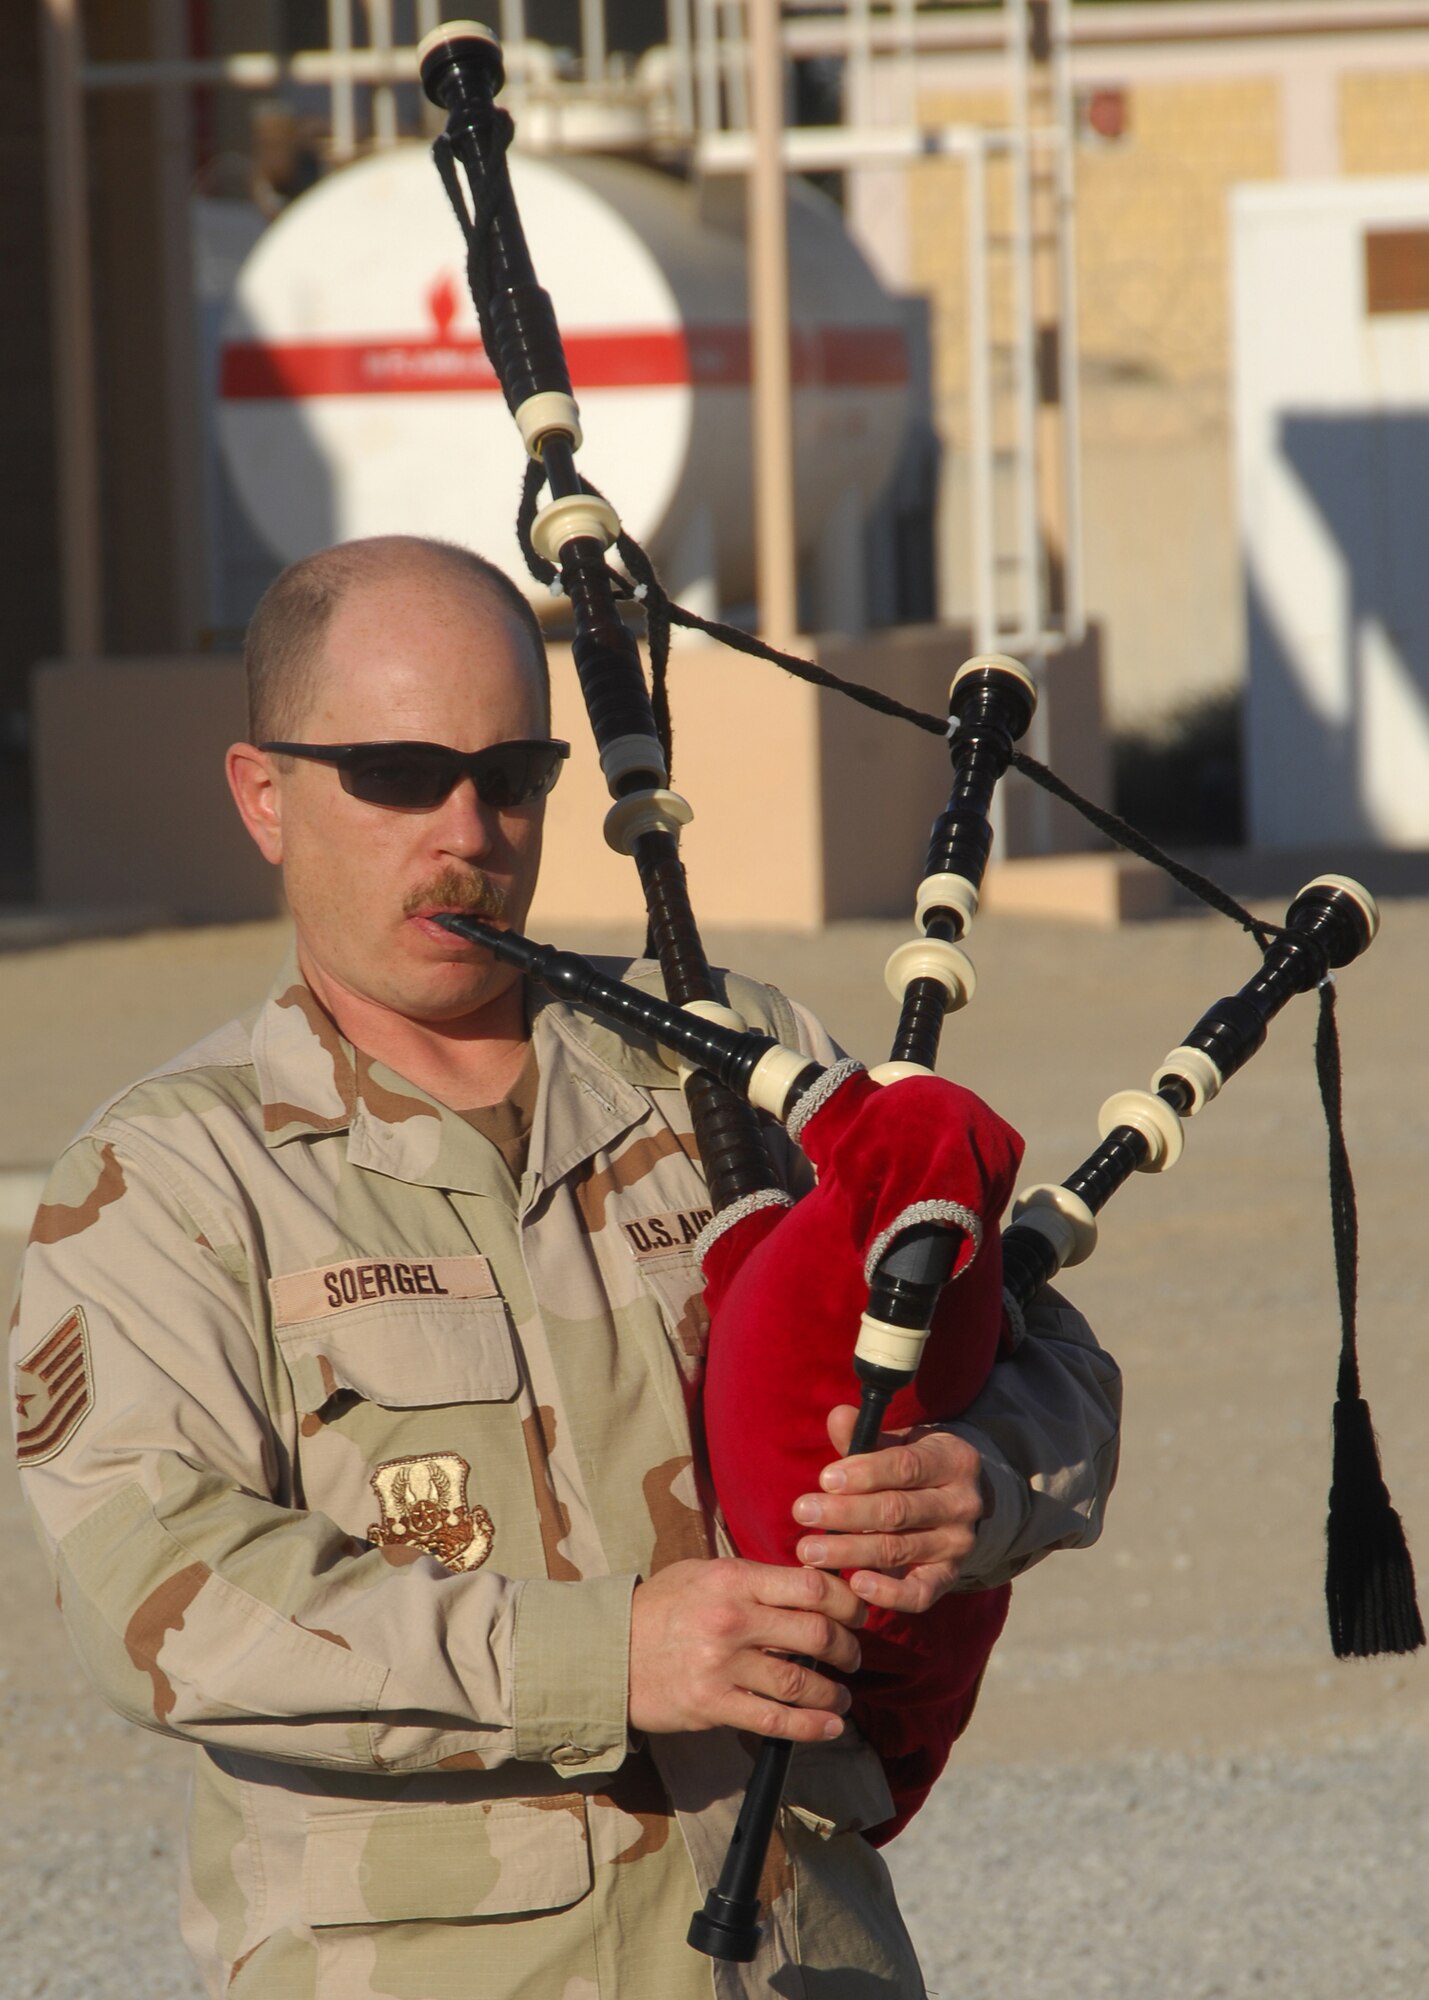 SOUTHWEST ASIA -- Tech. Sgt. Peter Soergel plays the bagpipe during the memorial service for fallen firefighter Senior Airman Joseph Martinez on Dec. 8 at an air base in Southwest Asia. Airman Martinez was a firefighter from the 156th Airlift Wing, Puerto Rico Air National Guard, and was deployed to the 386th Expeditionary Civil Engineer Squadron from April through September 2008. (U.S. Air Force photo/Tech. Sgt. Raheem Moore) 